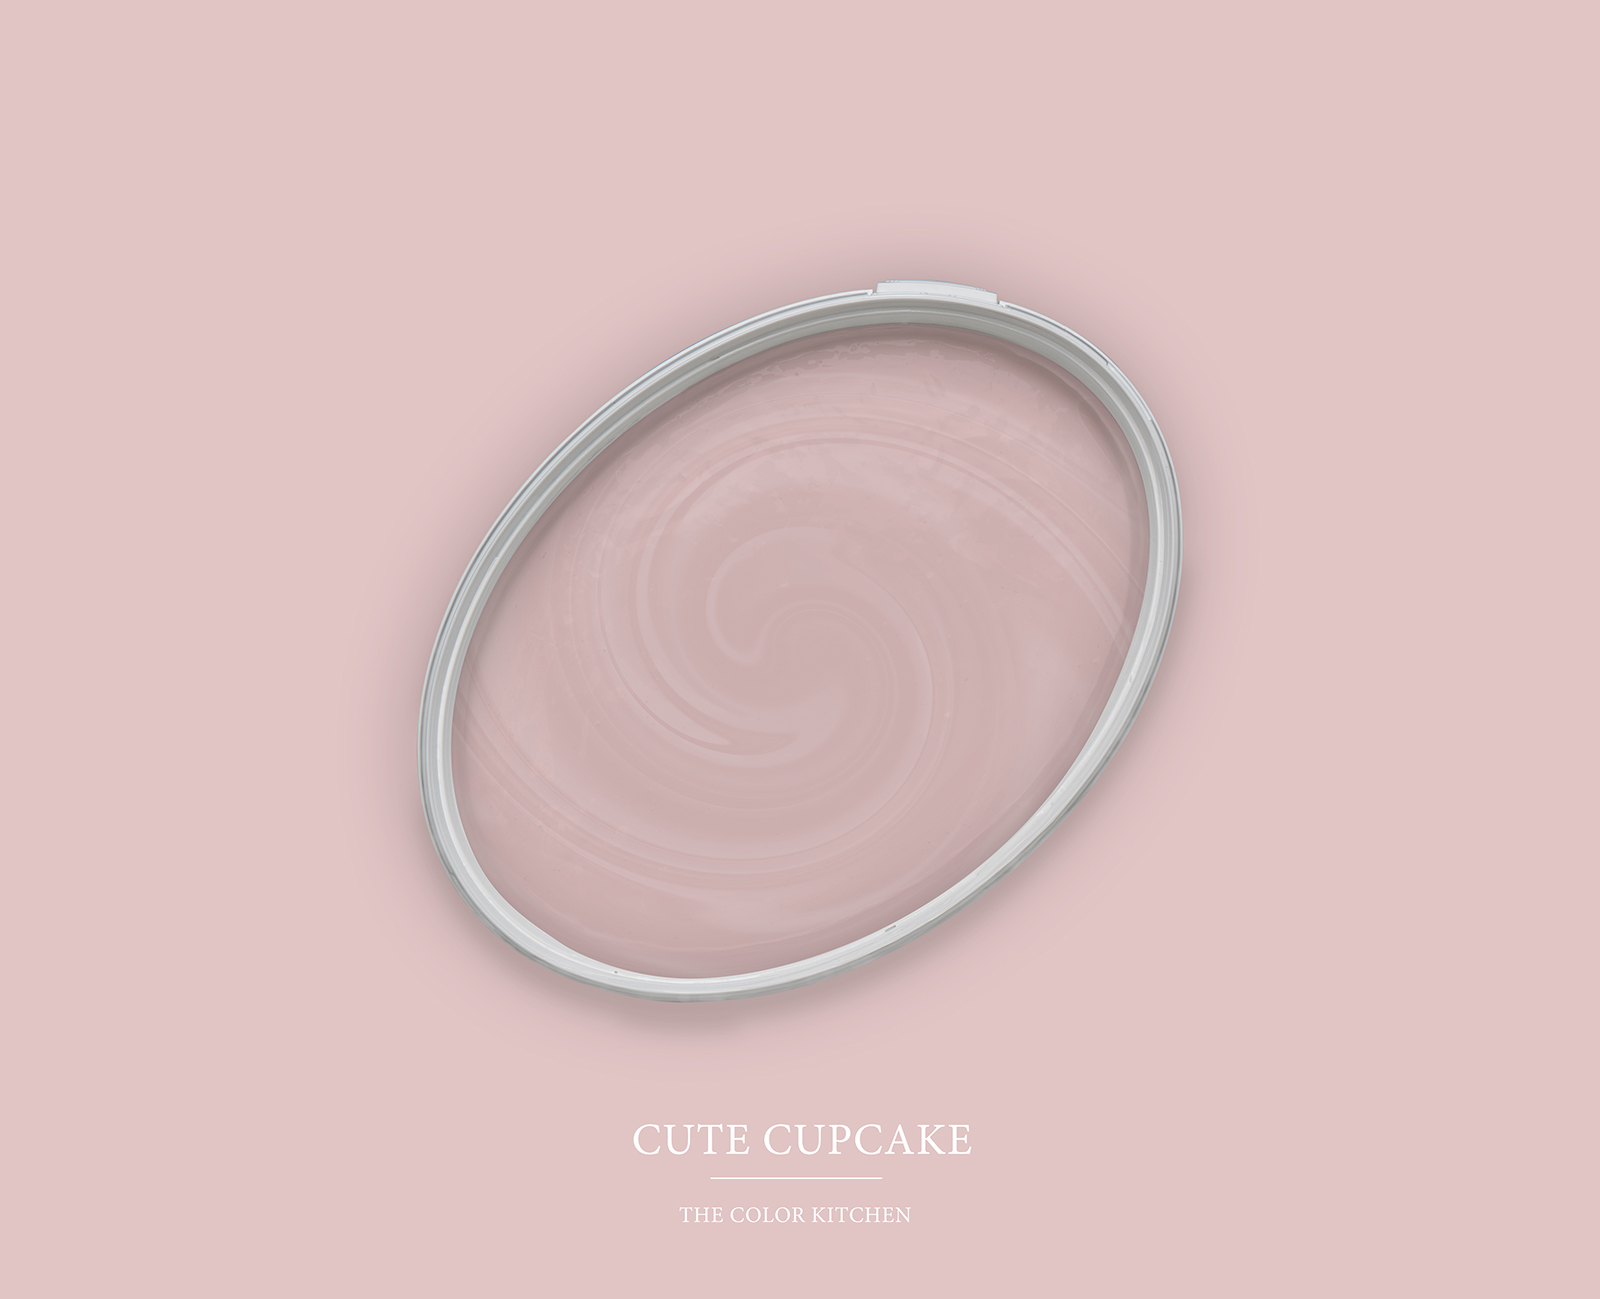         Wall Paint TCK7008 »Cute Cupcake« in delicate pink – 2.5 litre
    